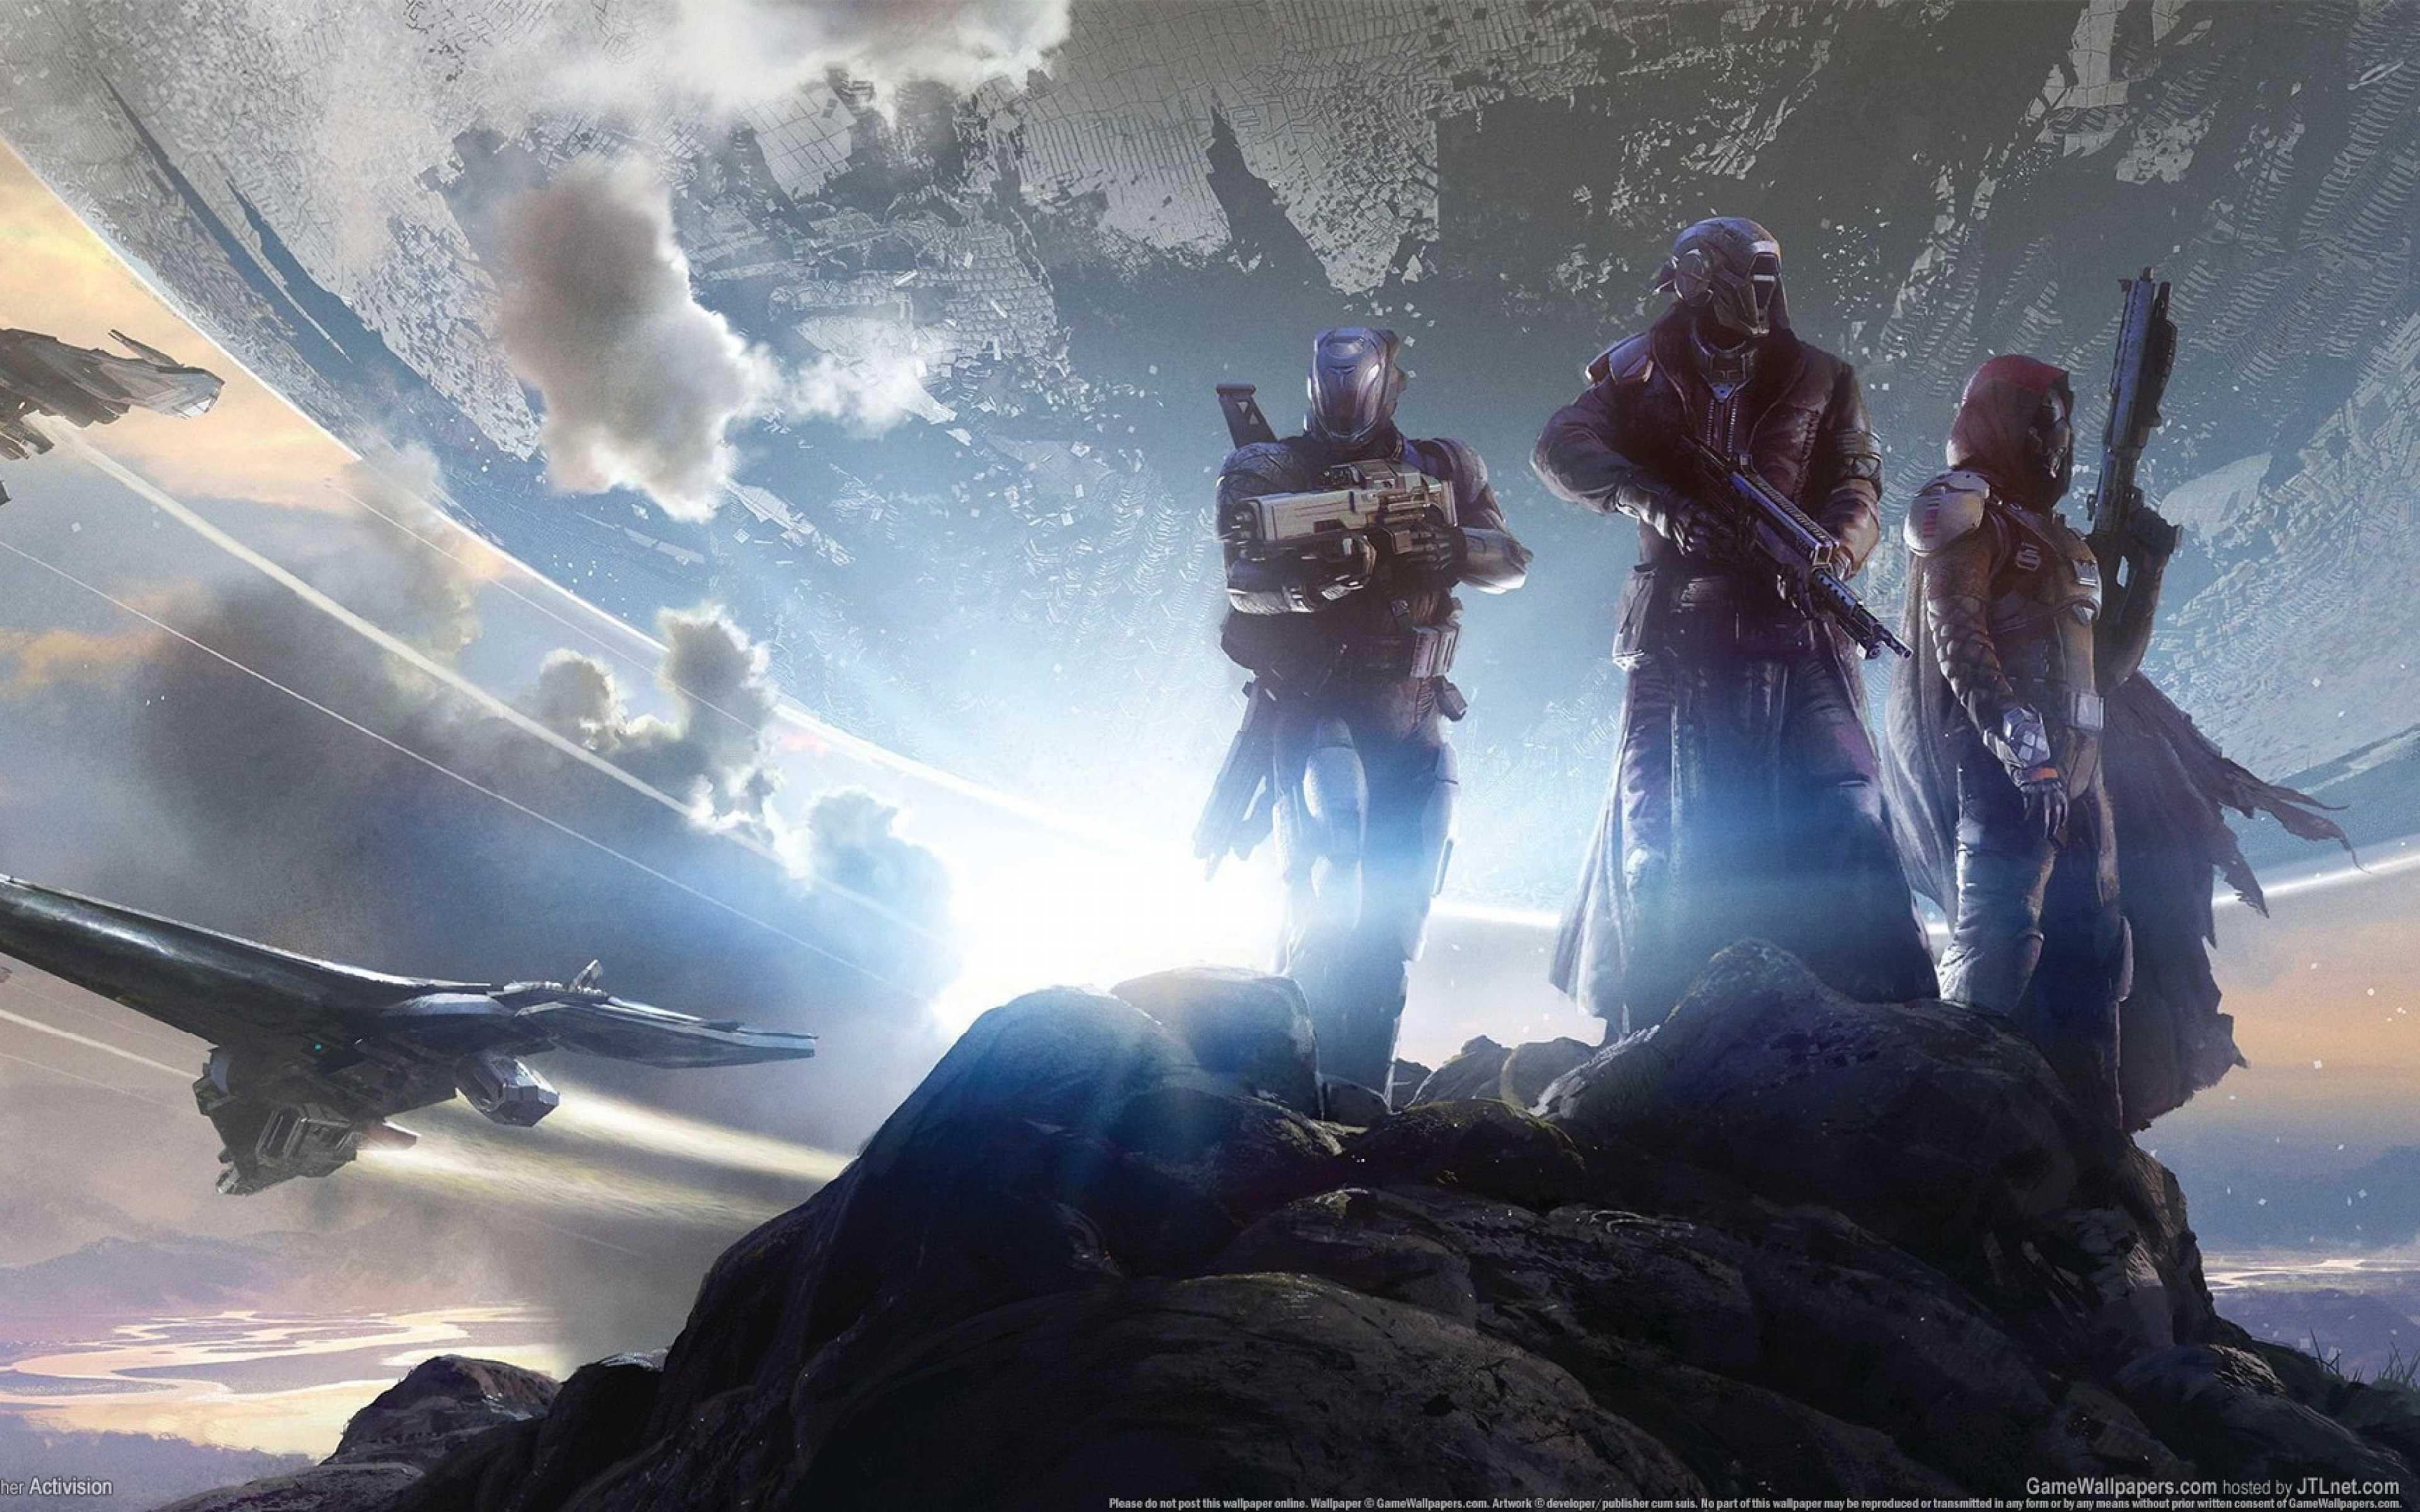 Destiny 2 Background - KoLPaPer - Awesome Free HD Wallpapers